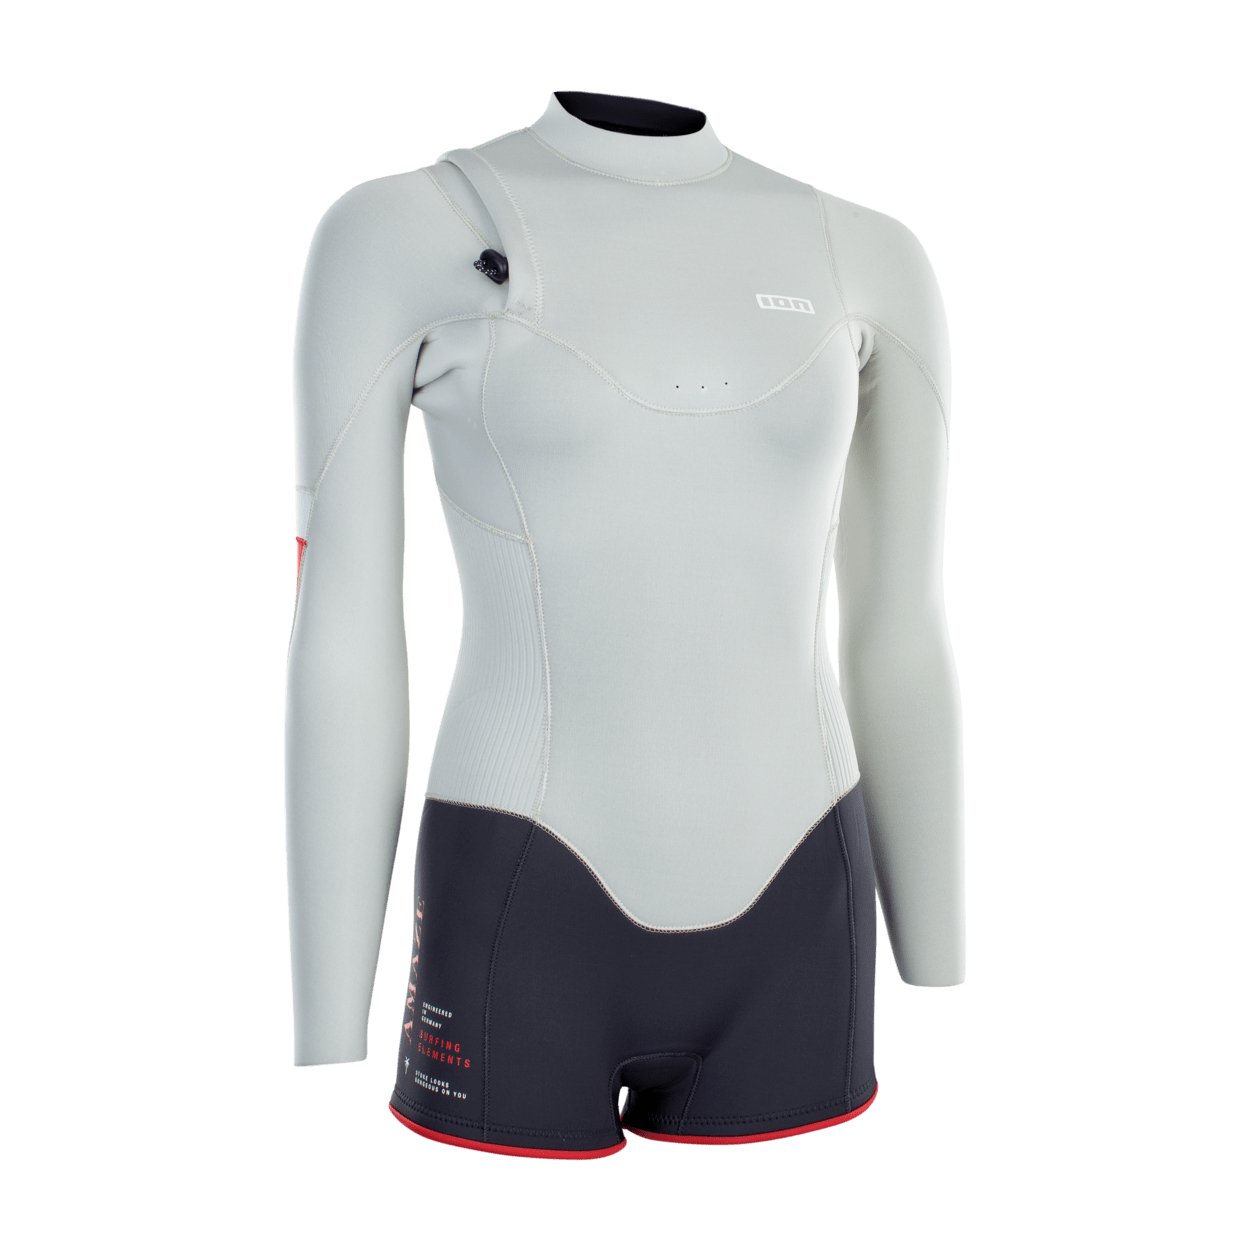 ION Amaze Shorty LS 2.0 NZ DL 2021 - Worthing Watersports - 9008415953639 - Wetsuits - ION Water